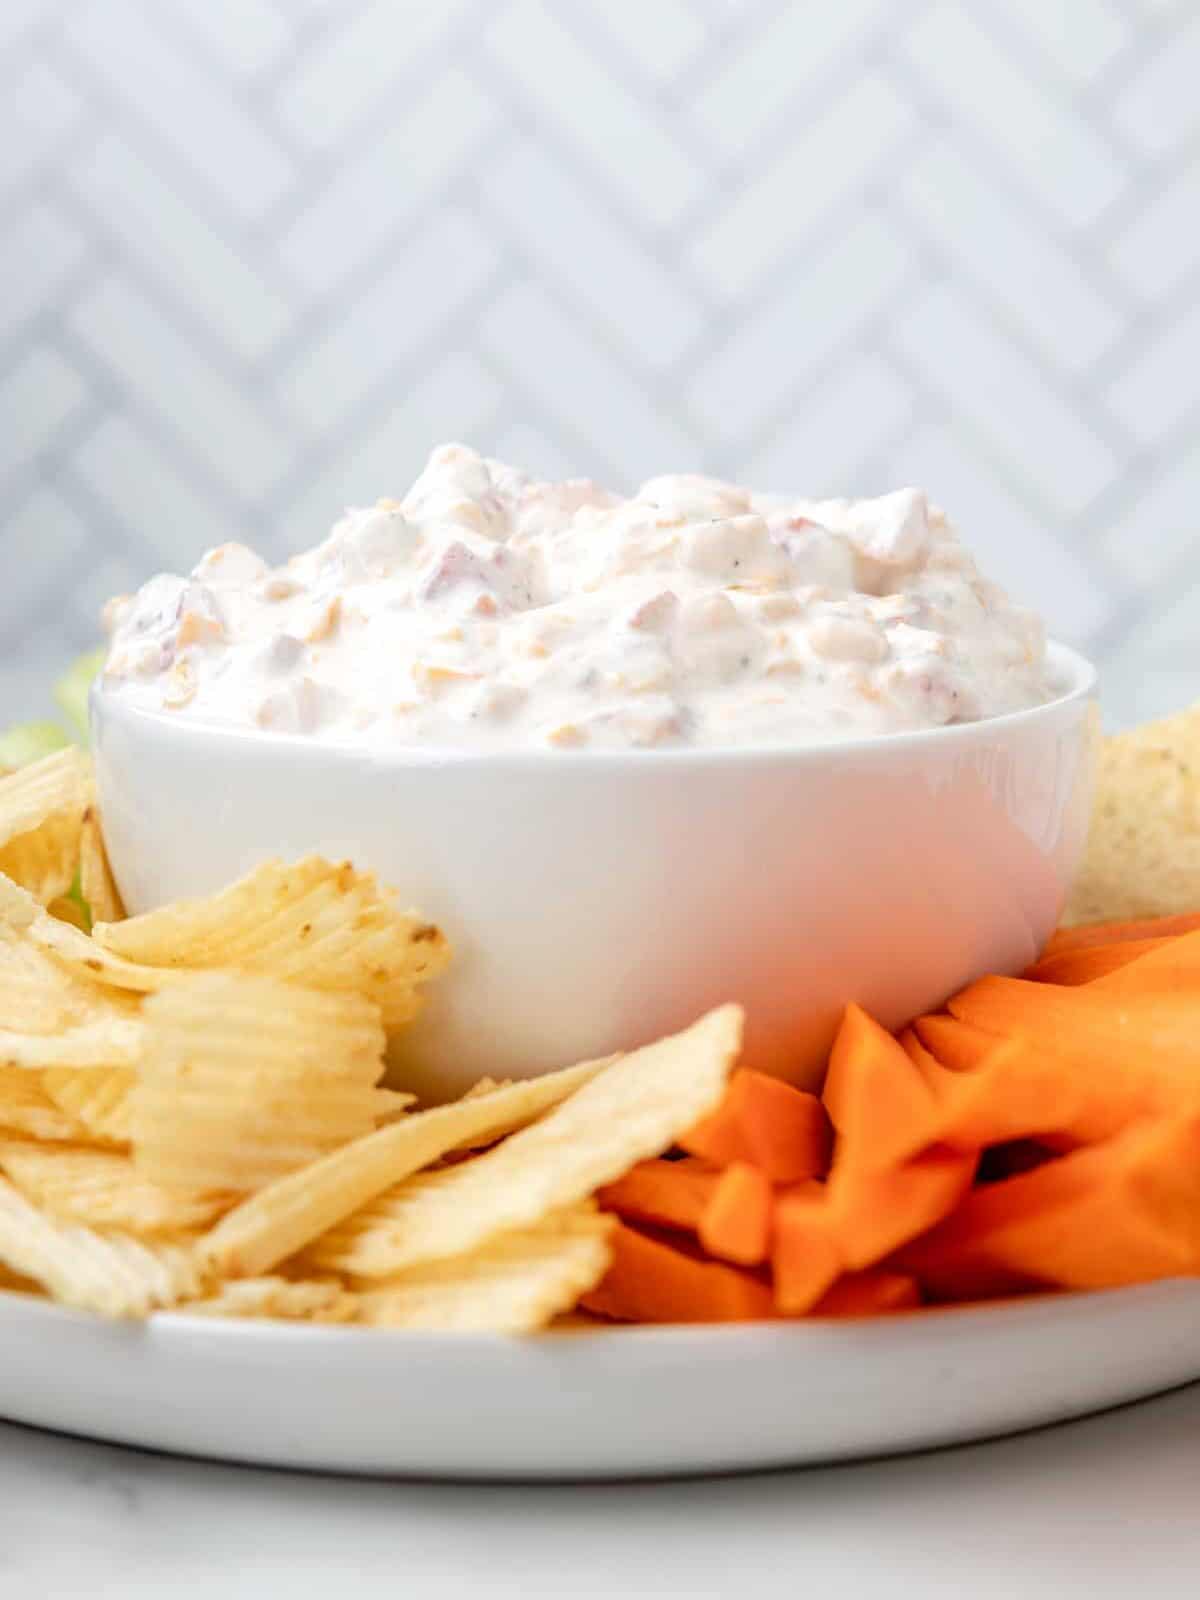 side view of cold fiesta ranch dip in a white bowl surrounded by wavy potato chips and carrot sticks,